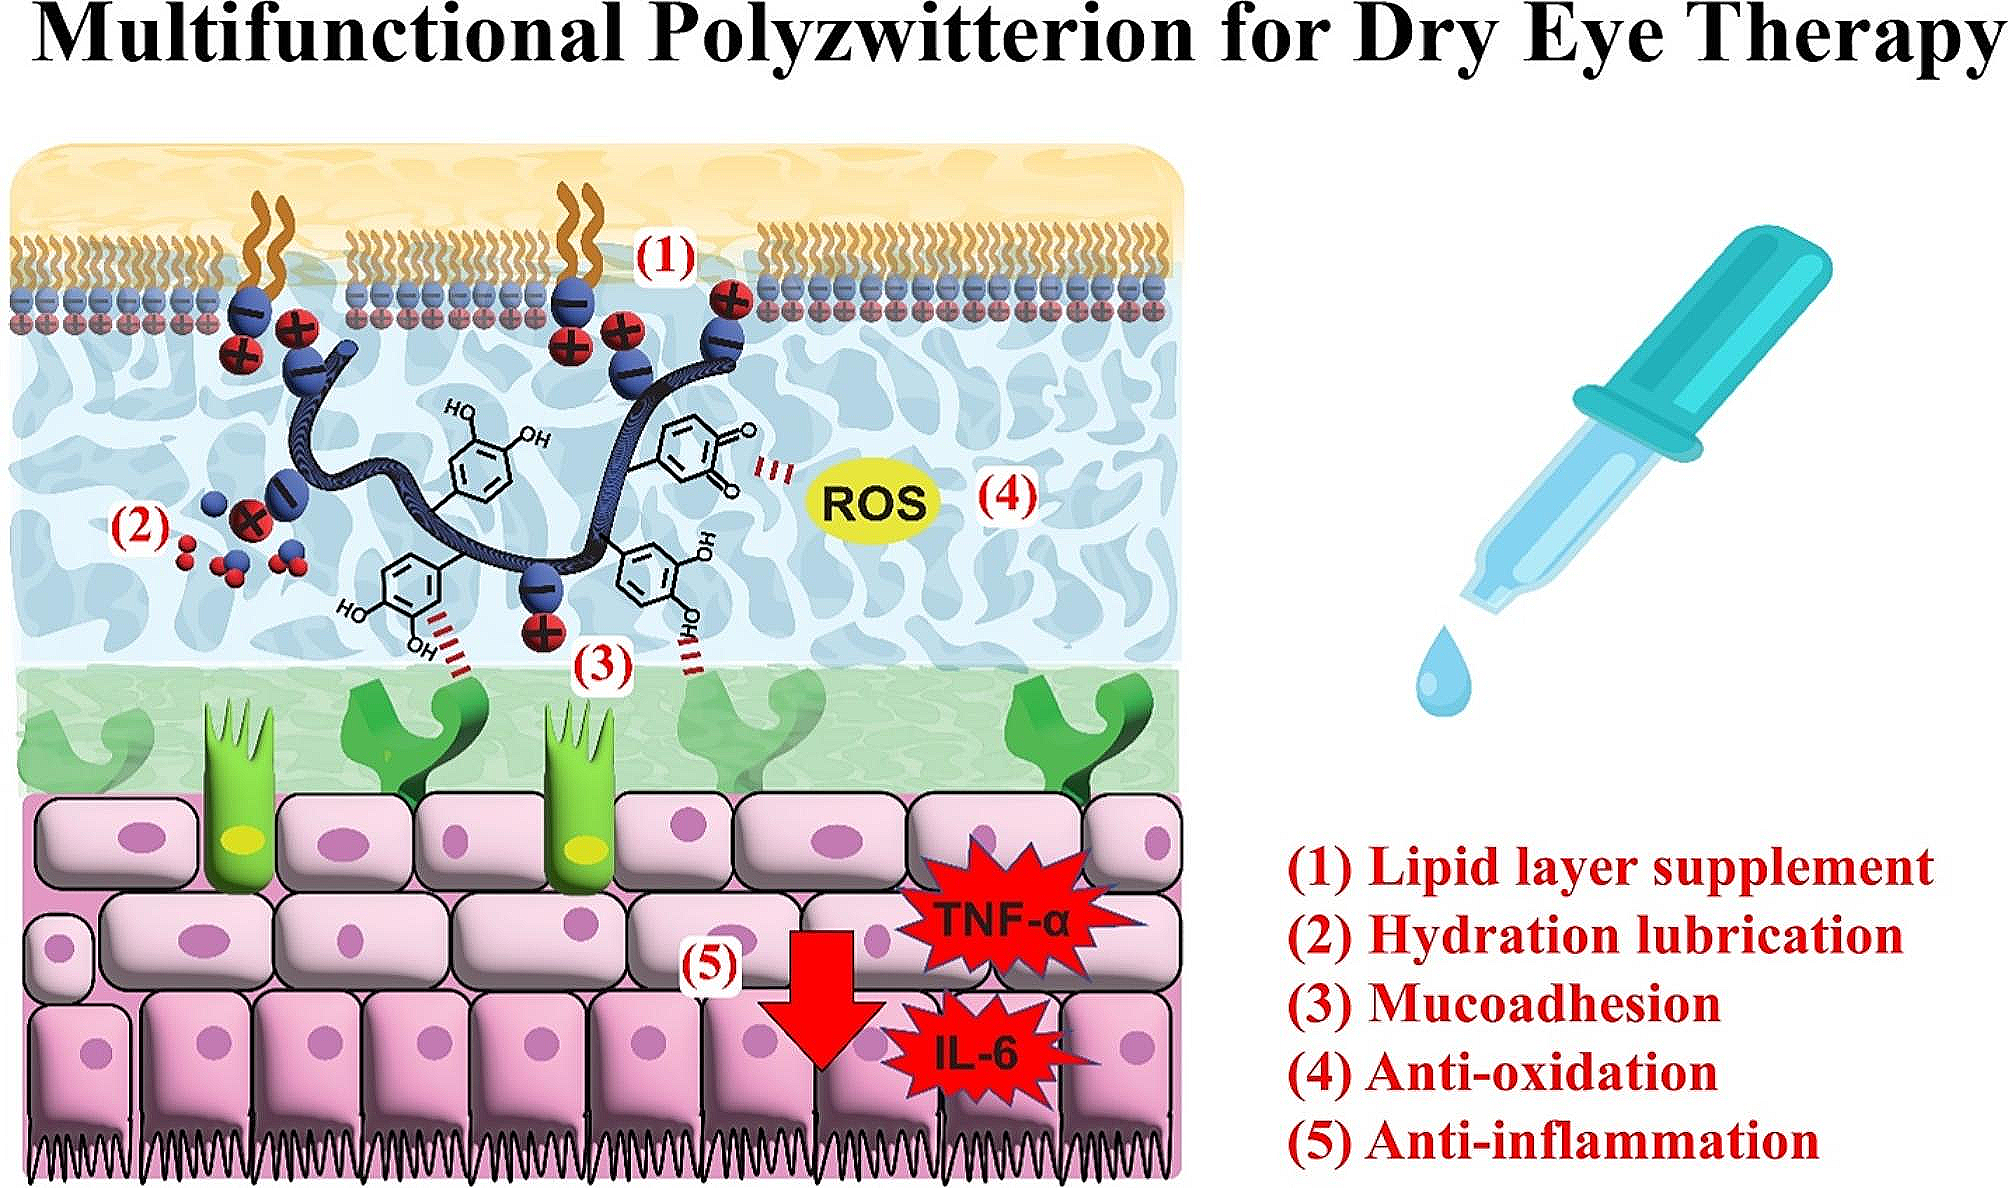 Mucoadhesive, antioxidant, and lubricant catechol-functionalized poly(phosphobetaine) as biomaterial nanotherapeutics for treating ocular dryness